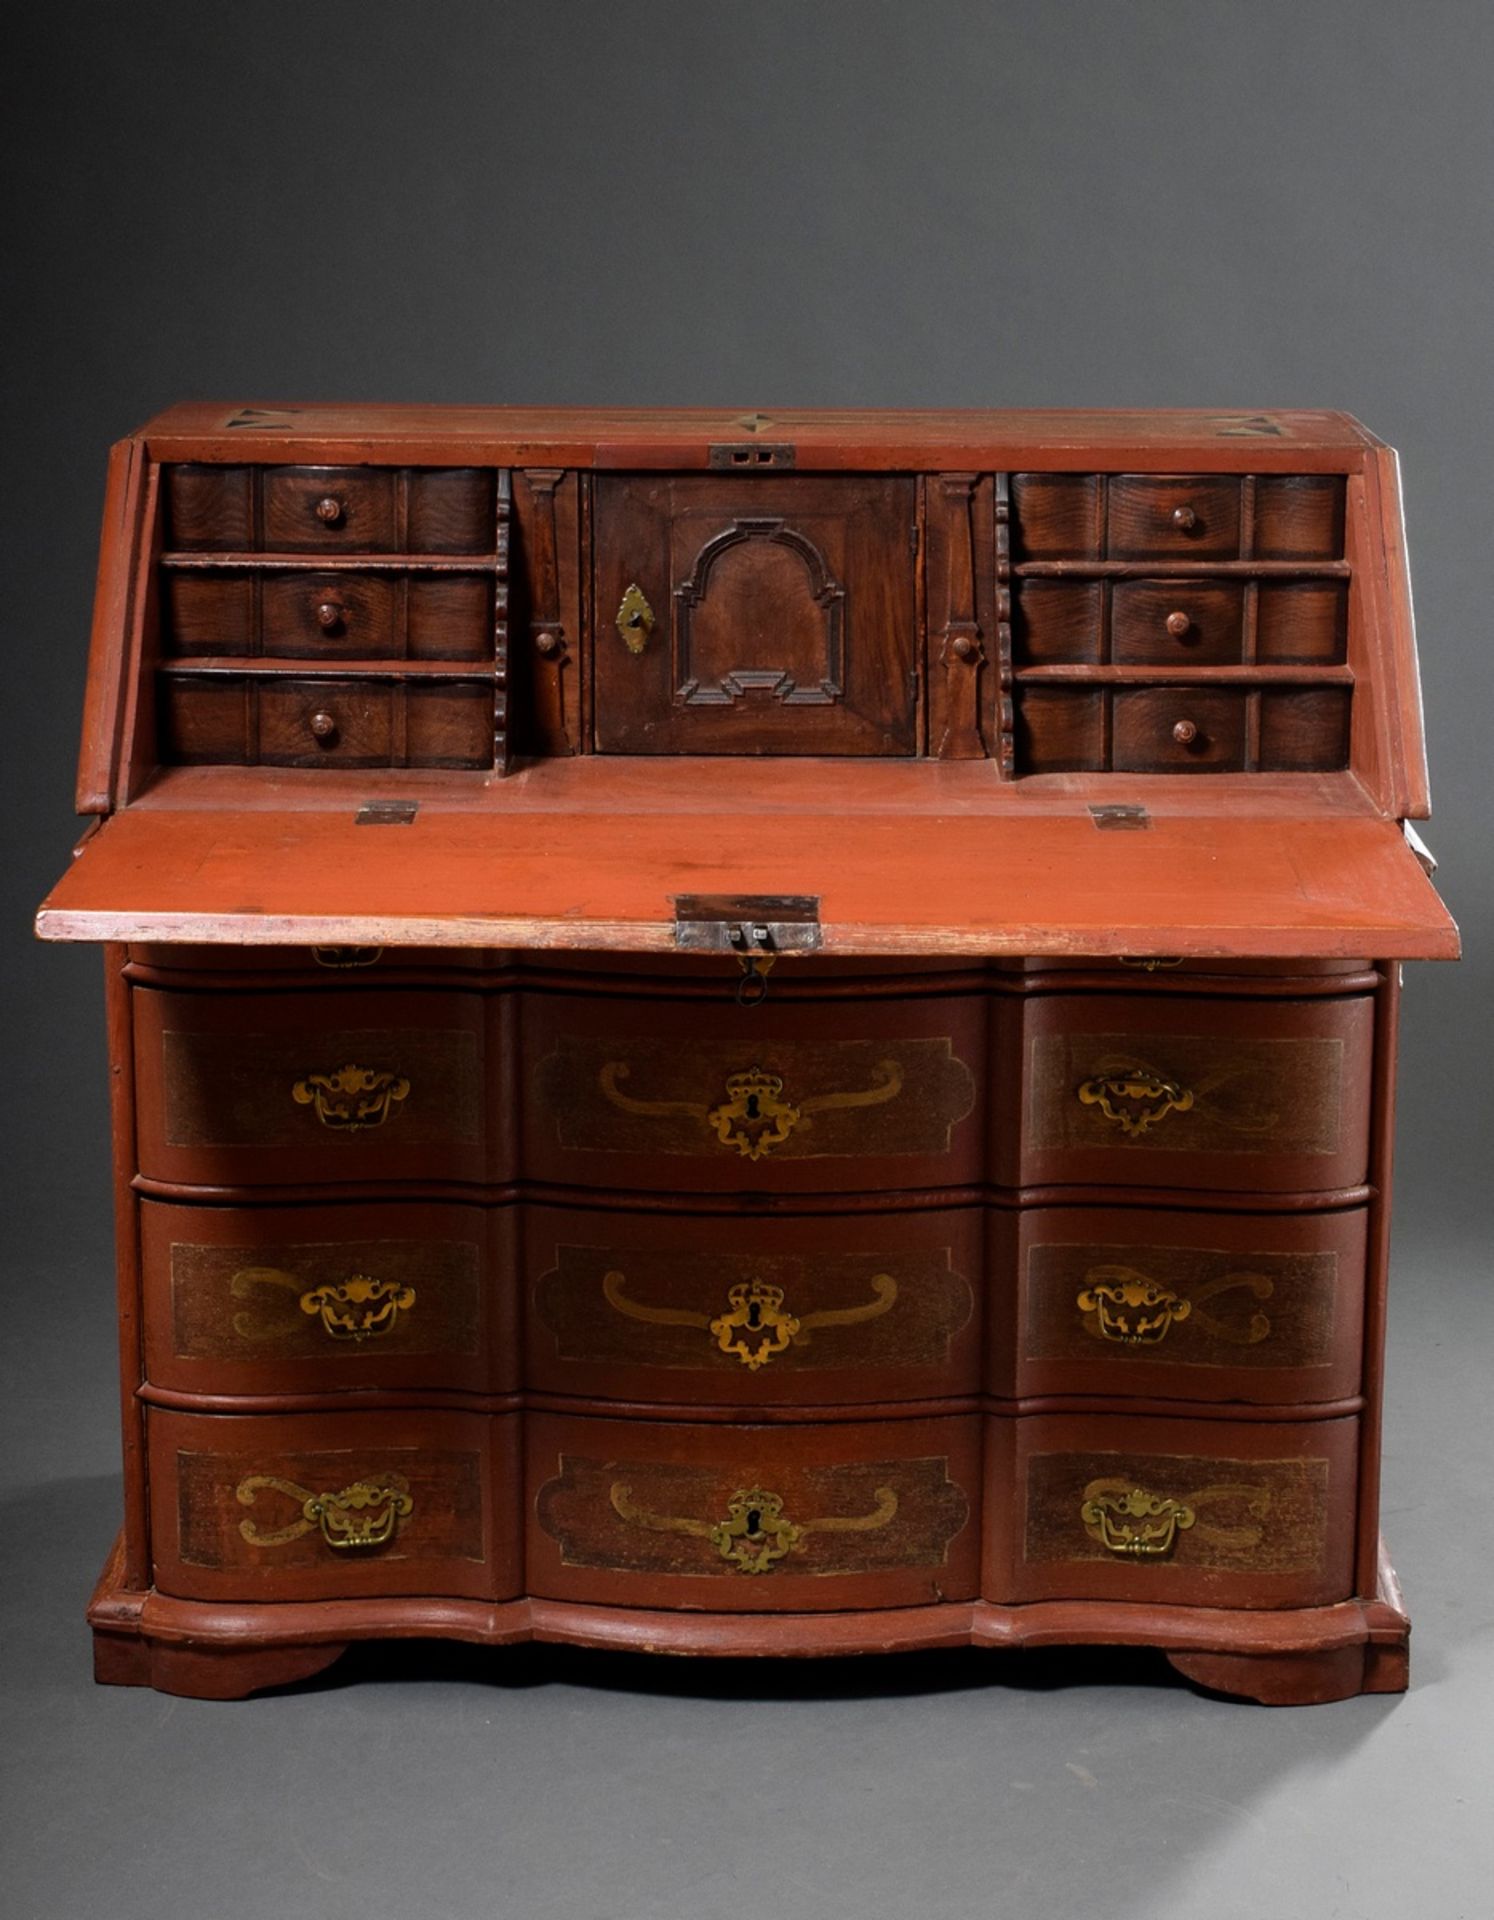 Rustic Danish secretary with slanted flap, star decoration, red/gold original frame and fittings as - Image 10 of 16